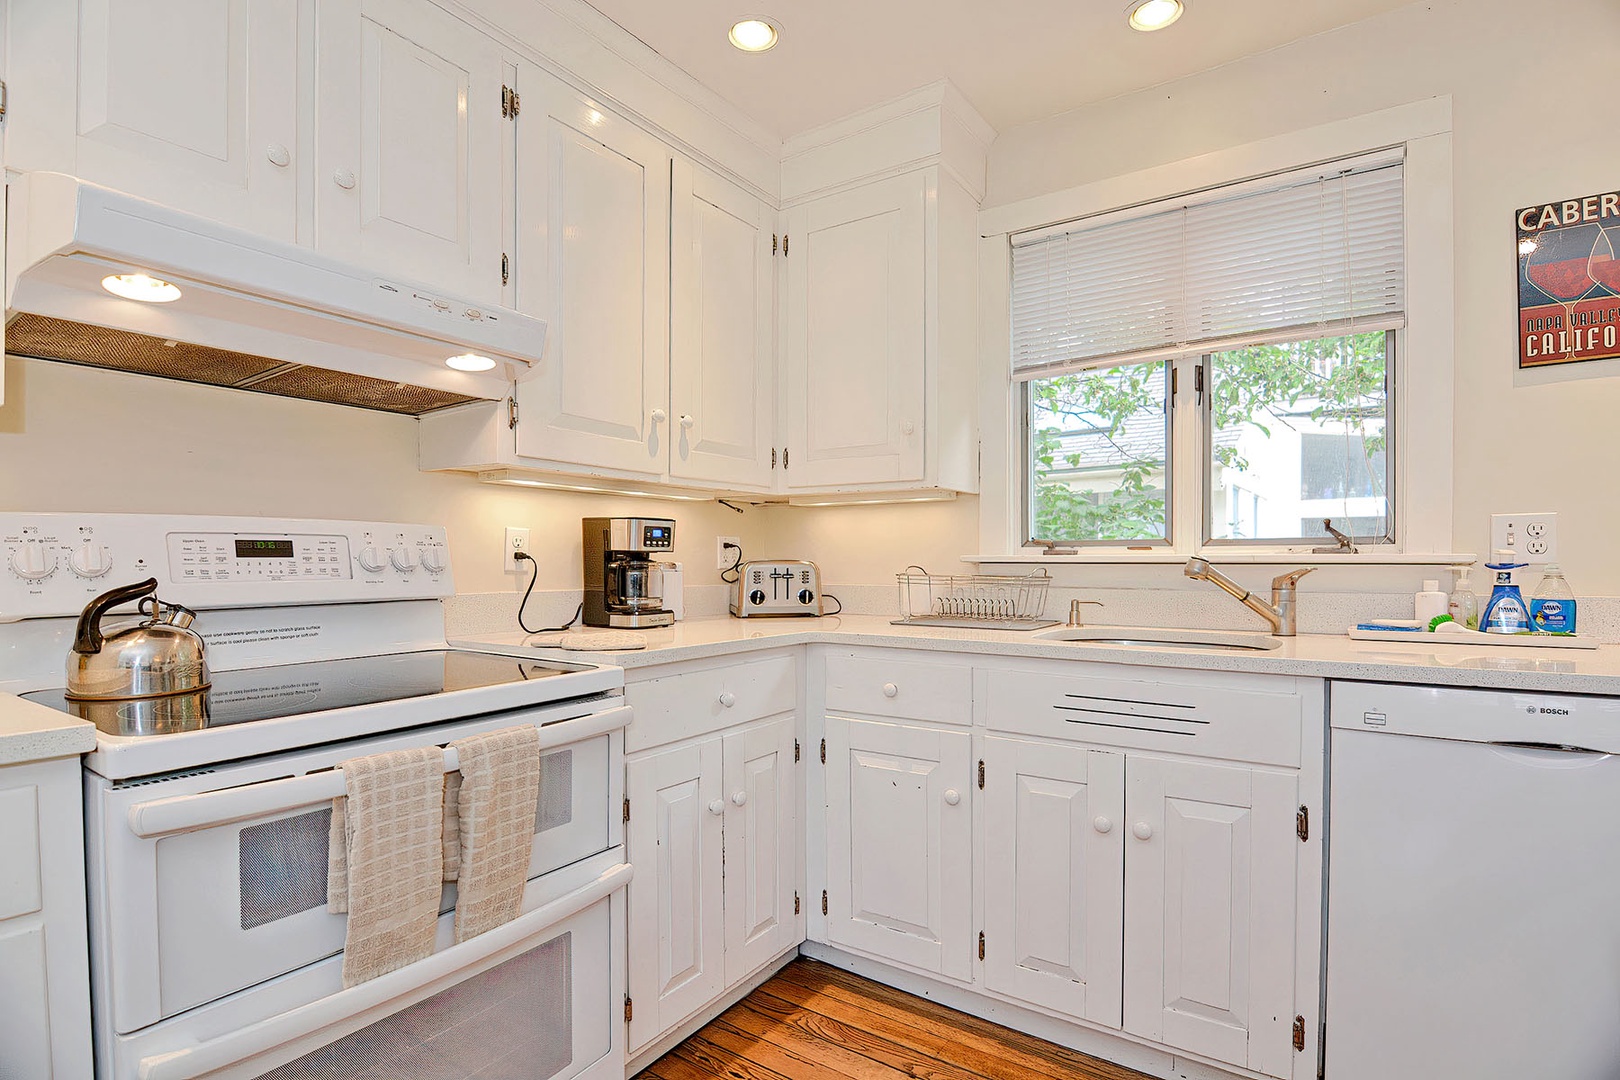 The kitchen includes an electric range and dishwasher.